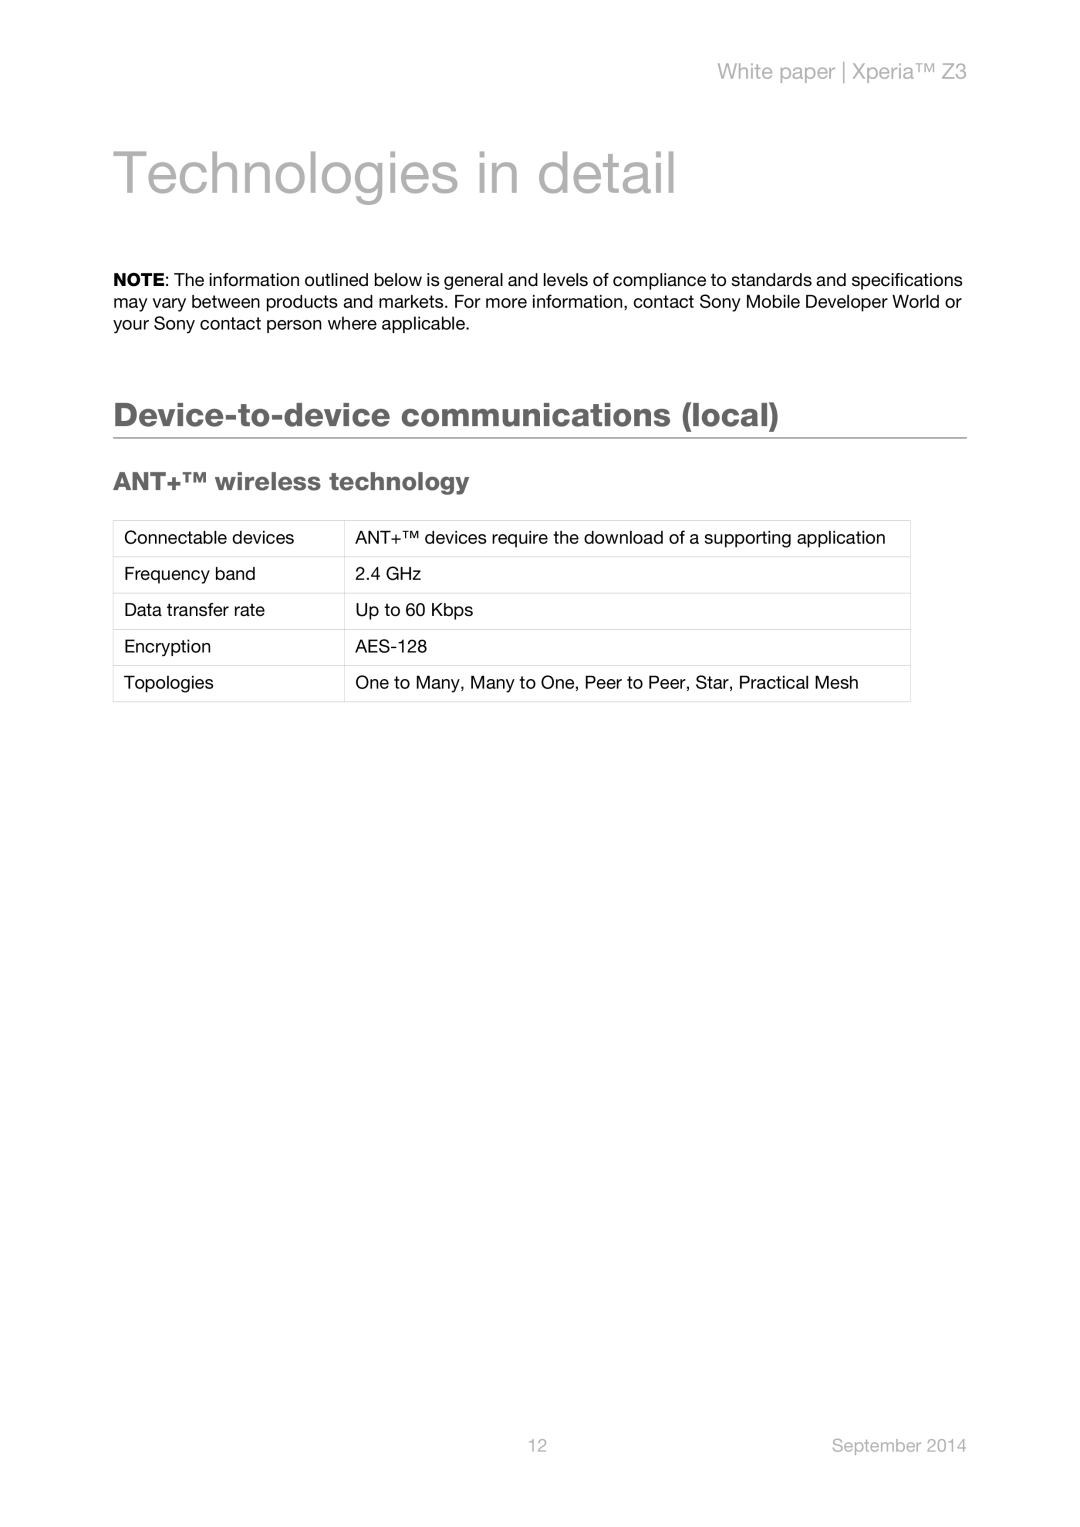 Sony D6643 Technologies in detail, Device-to-device communications local, ANT+ wireless technology, White paper Xperia Z3 